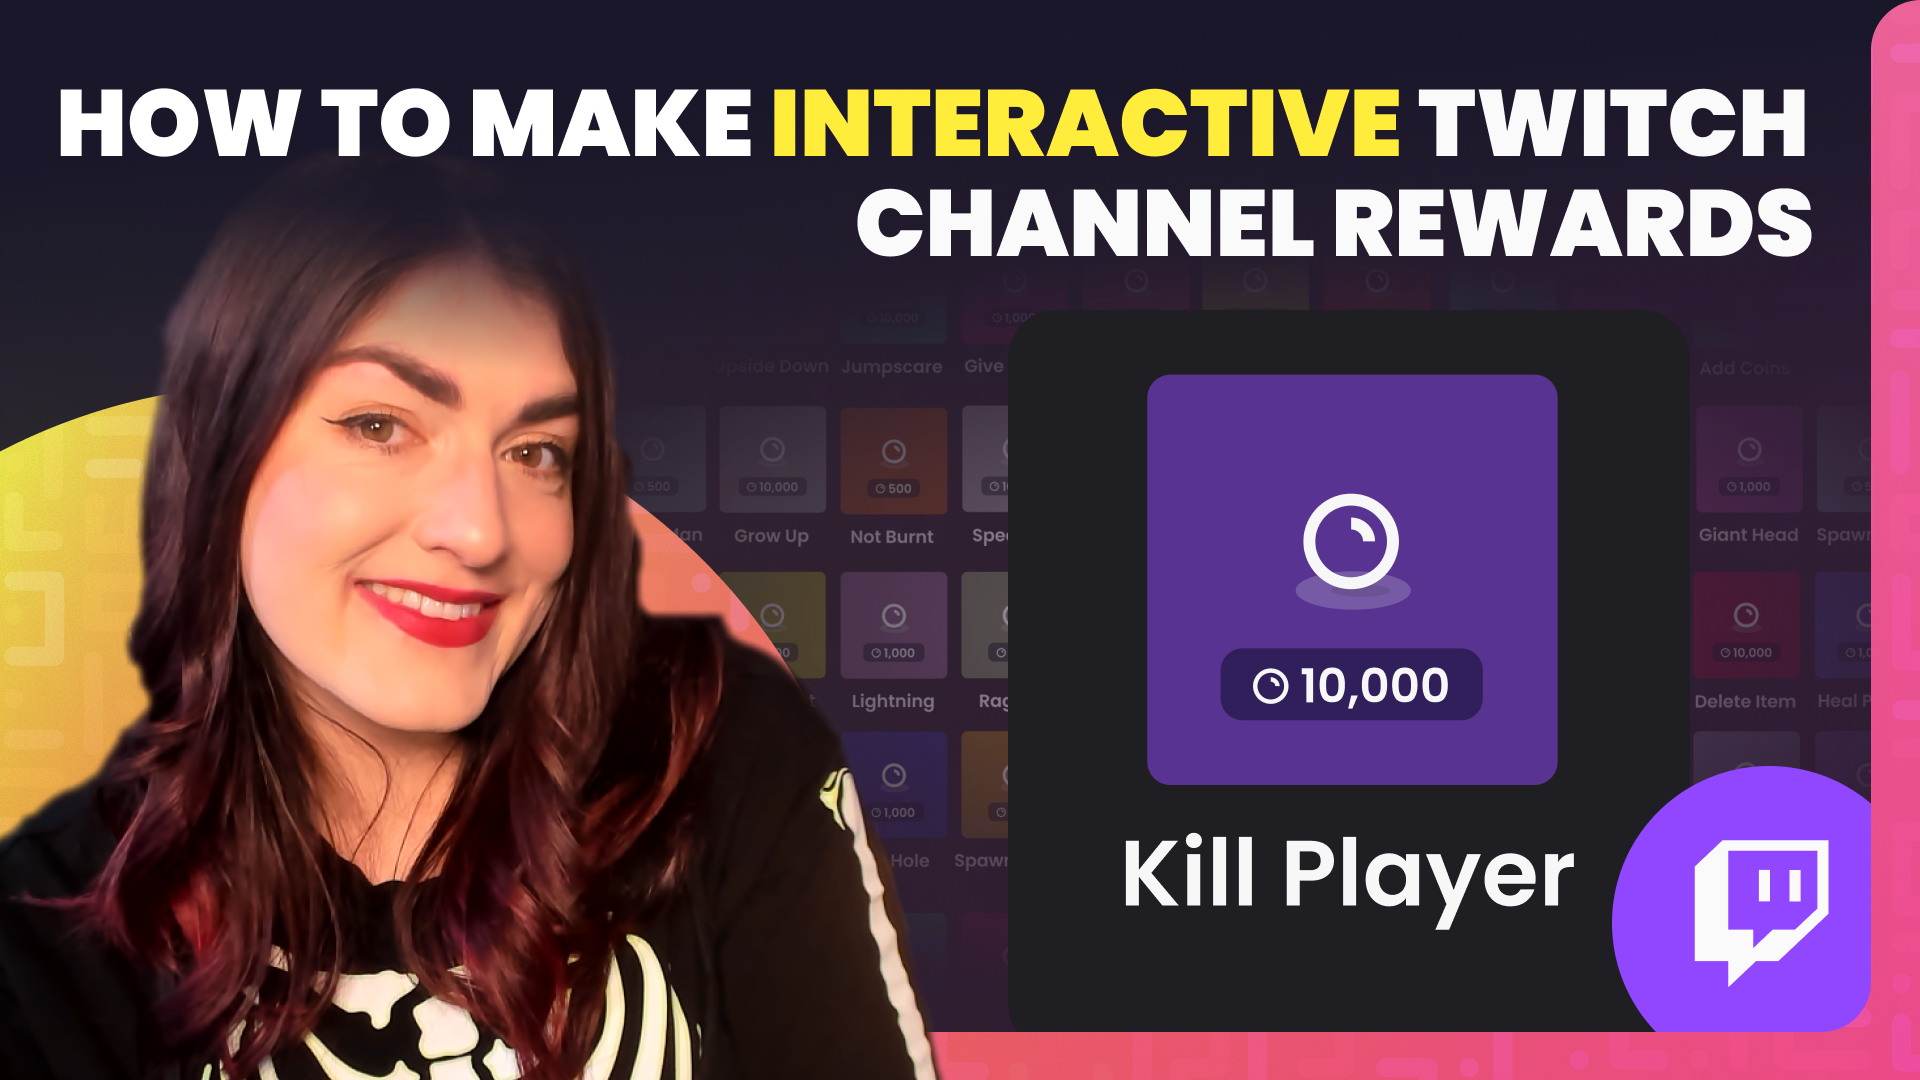 How to Add Twitch Channel Rewards that Interact With your Game